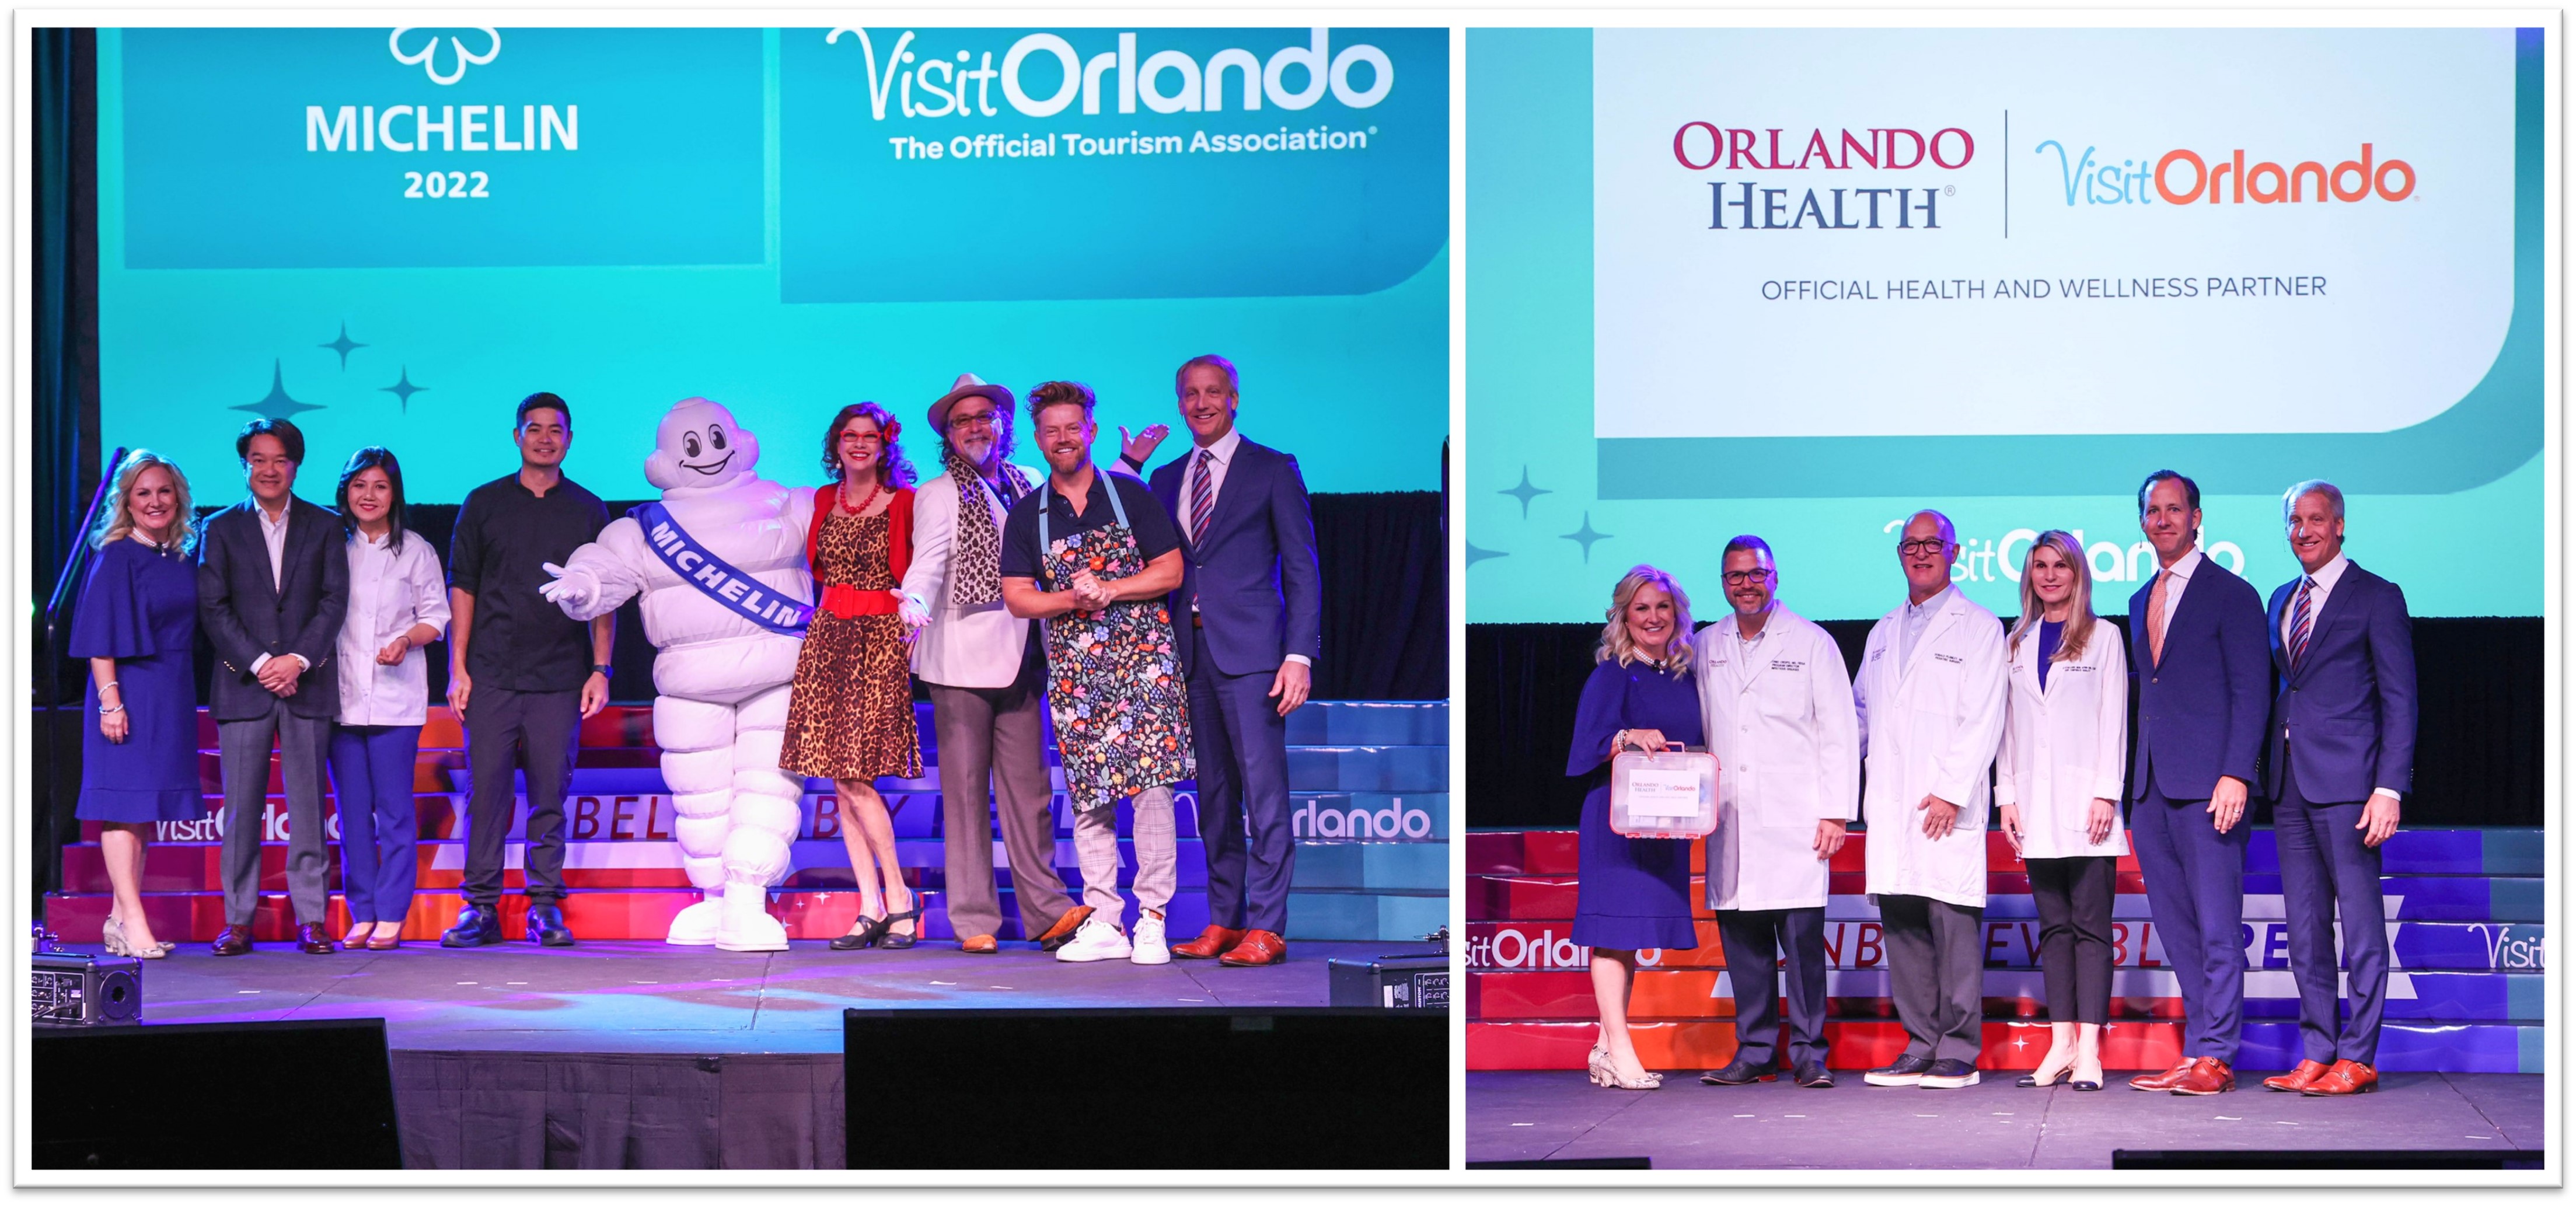 Casandra Matej, president and CEO at Visit Orlando, pictured with participating chefs in the Visit Orlando Magical Dining program, and with Orlando Health at Visit Orlando's Insights Luncheon.